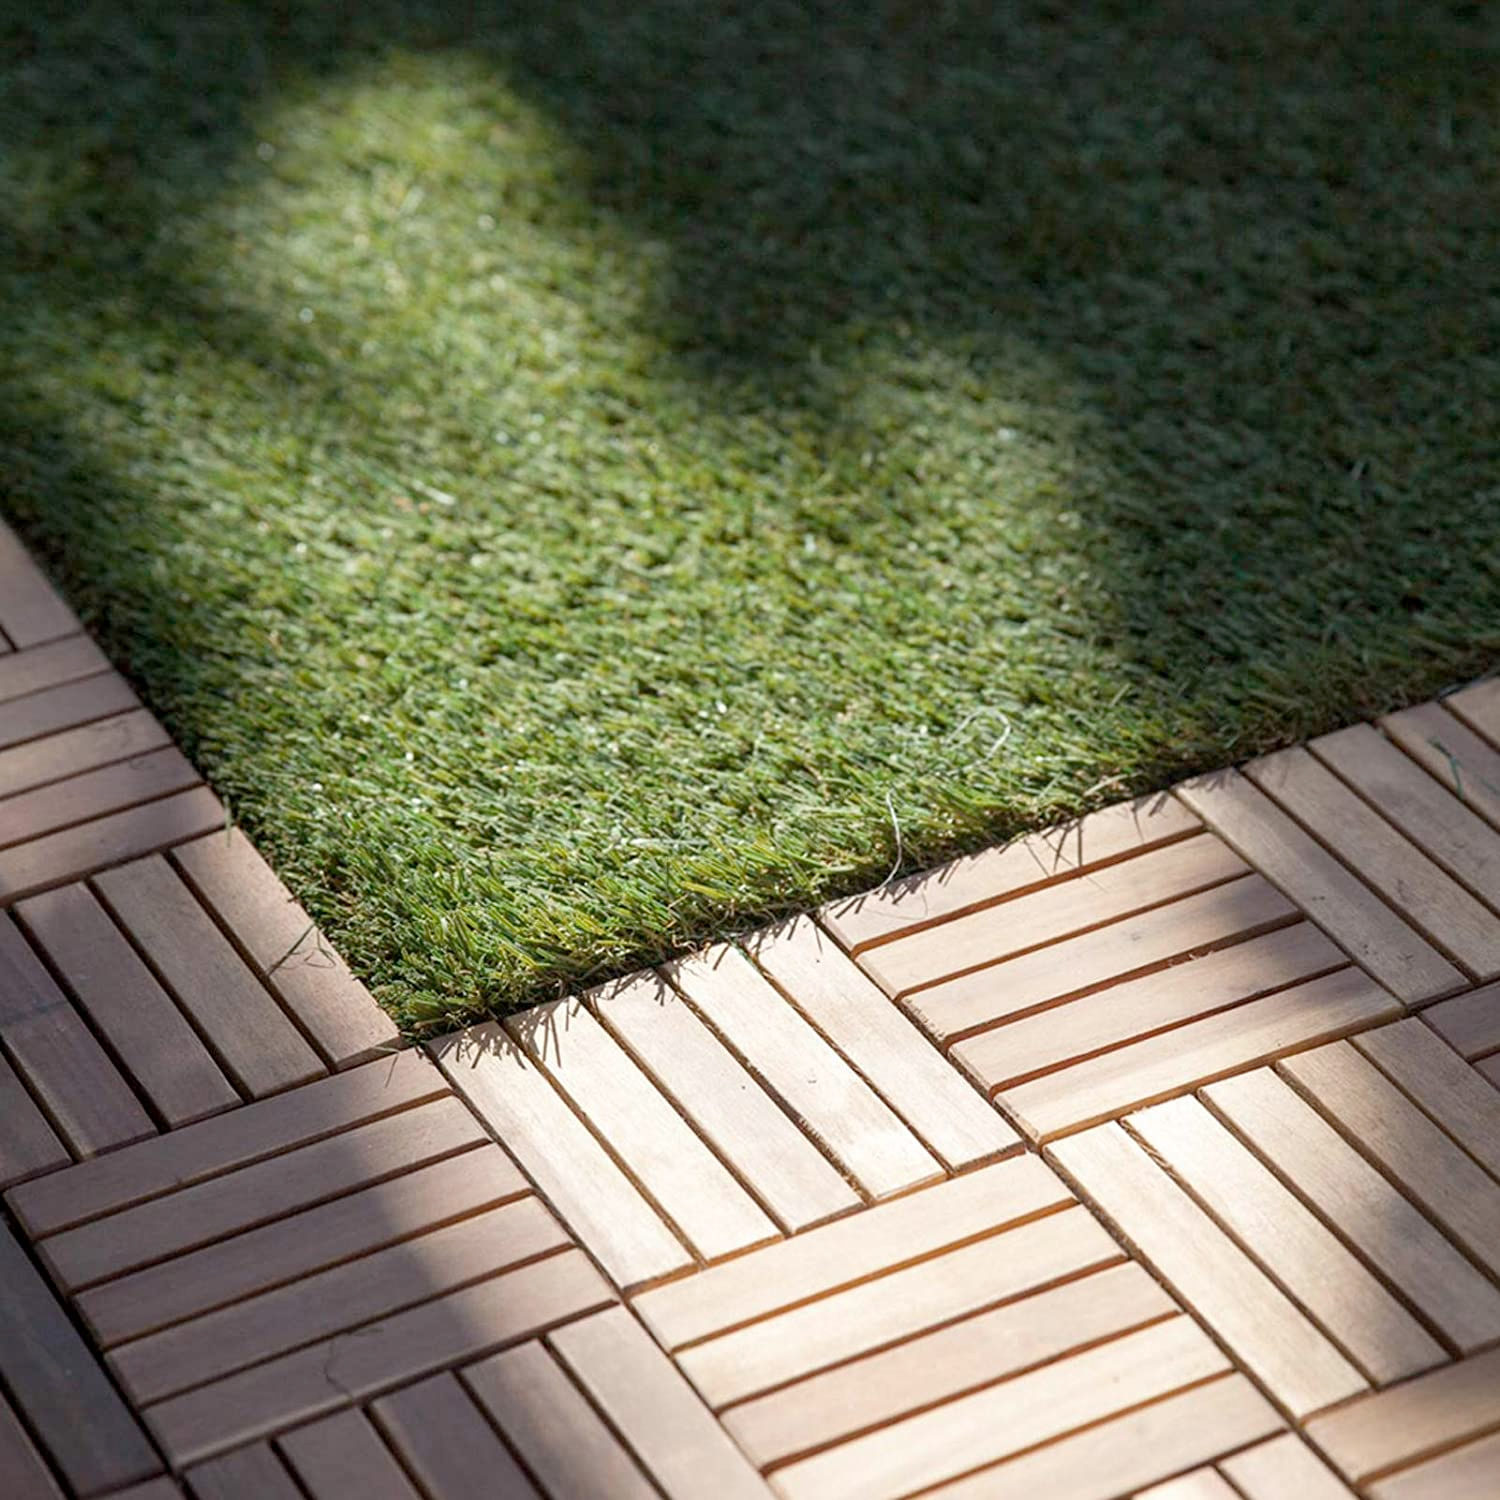 Furniture Source Philippines, How To Use Deck Tiles On Grass